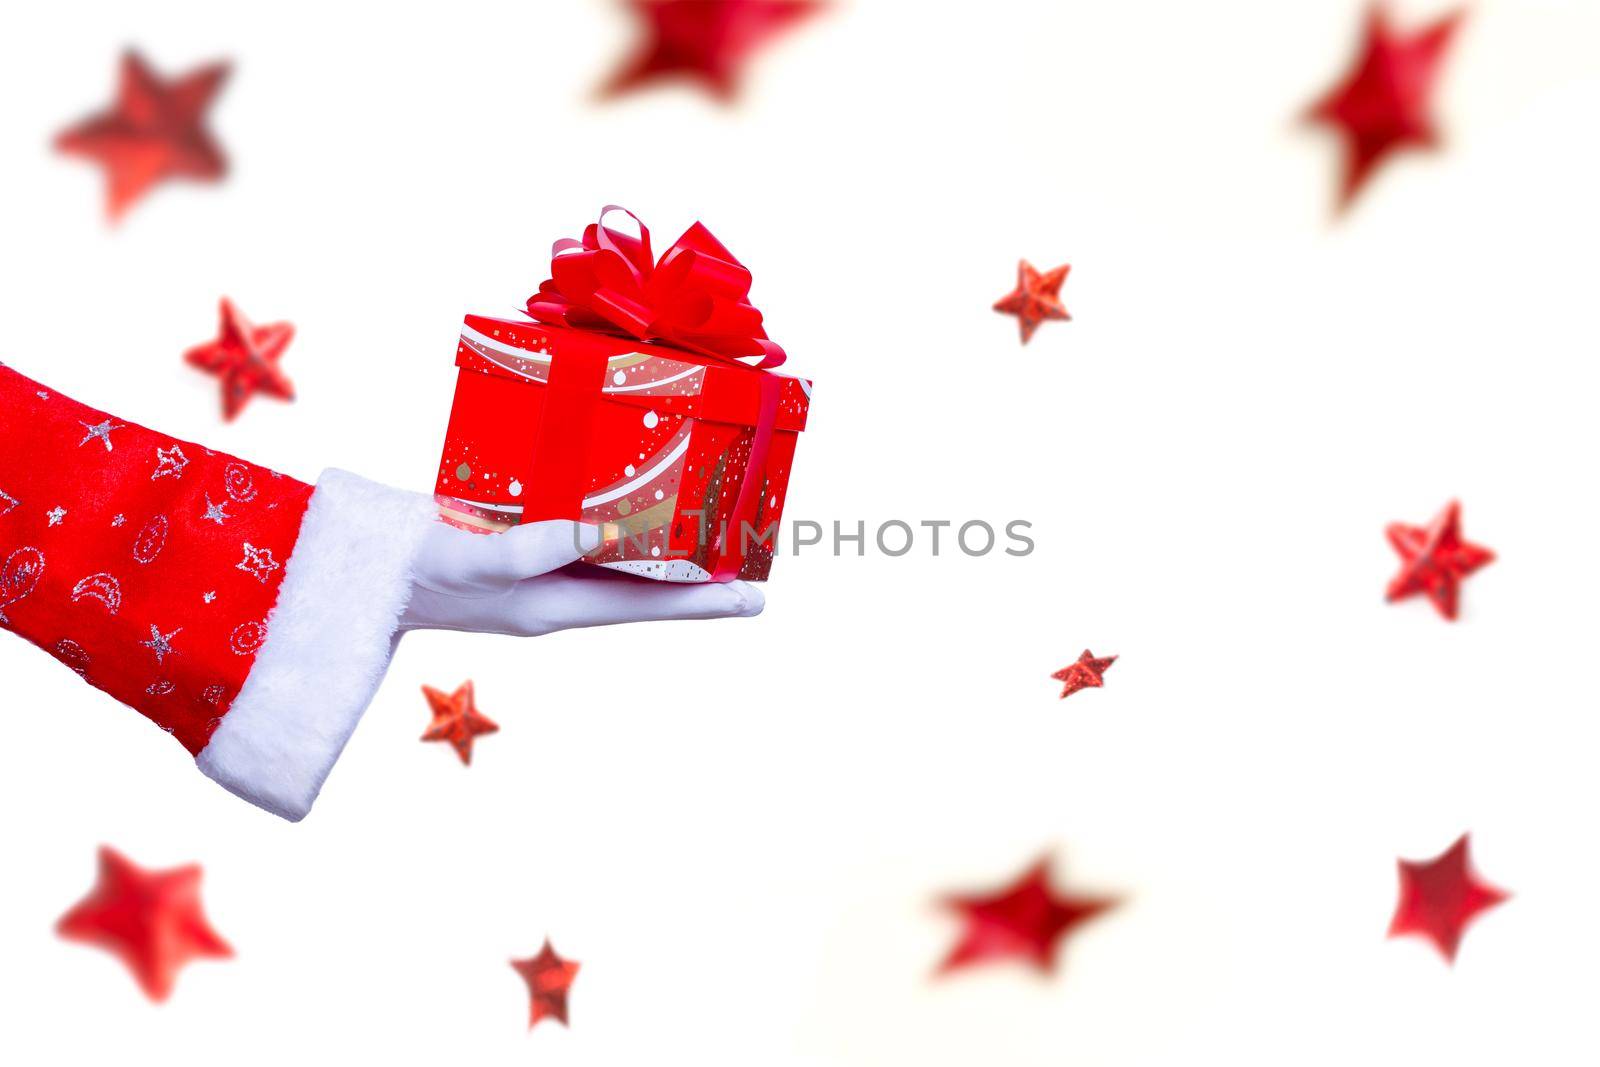 christmas santa claus hand with a present gift box  as a holiday season surprise  with red costume  and white gloves , isolated on background with stars falling and noel hand